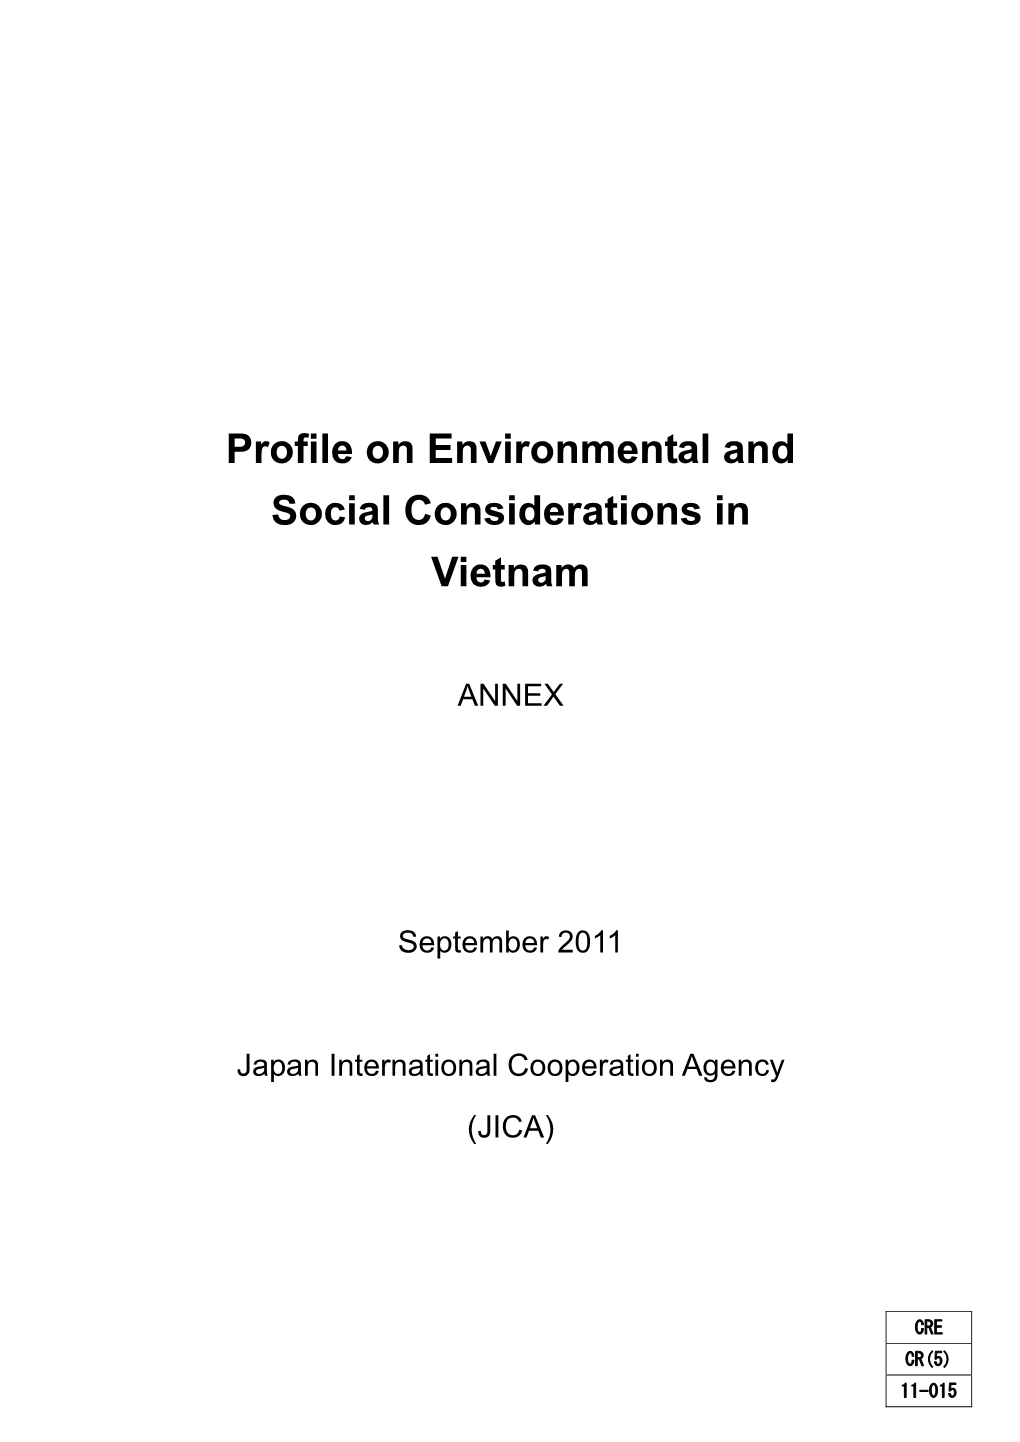 Profile on Environmental and Social Considerations in Vietnam